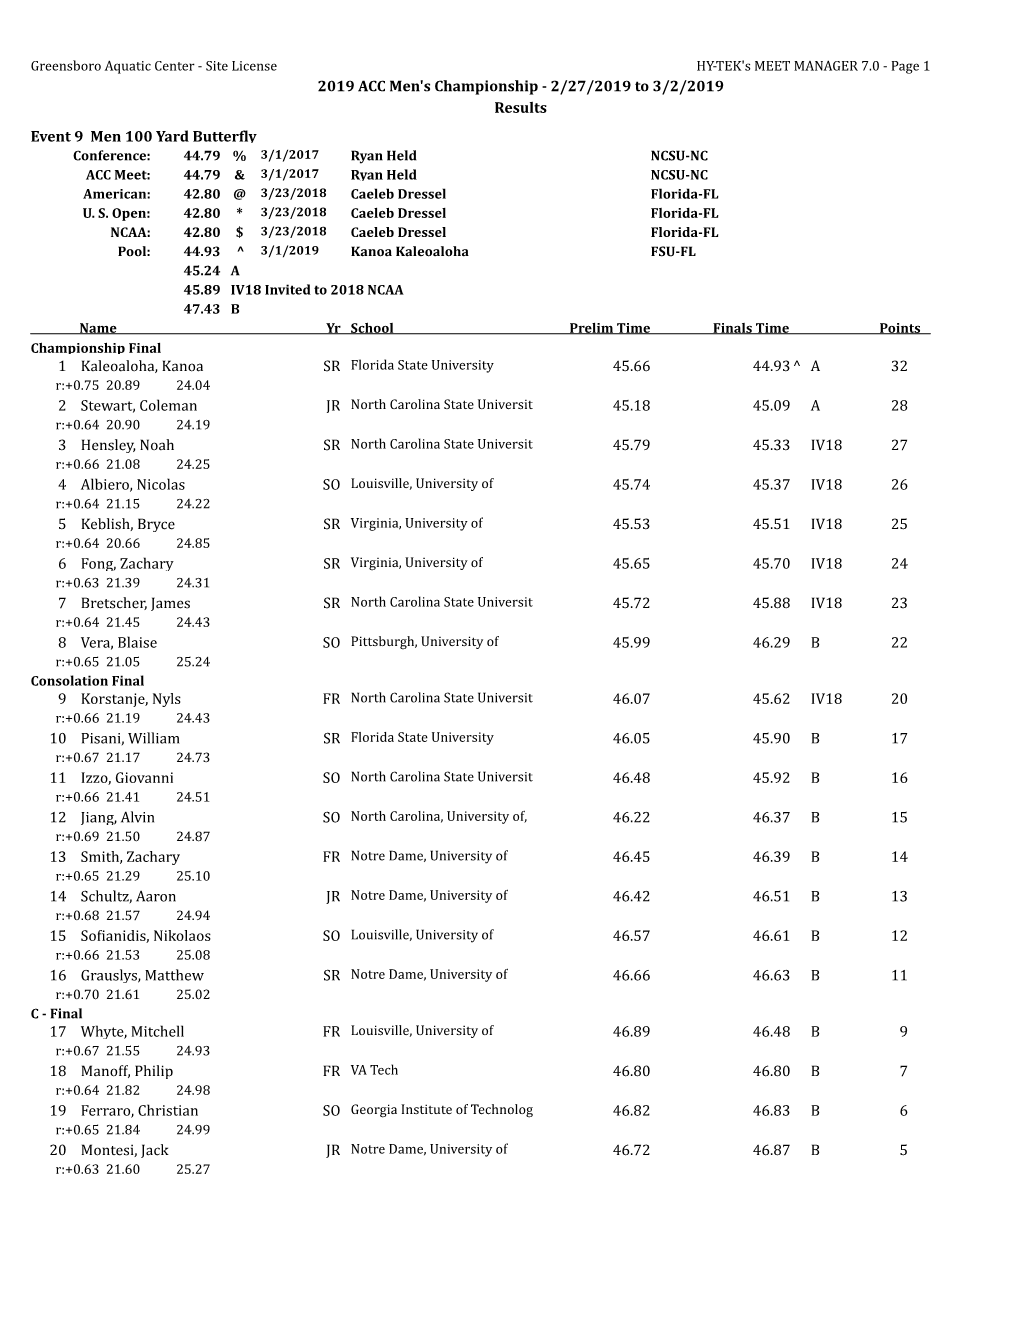 2019 ACC Men's Championship - 2/27/2019 to 3/2/2019 Results